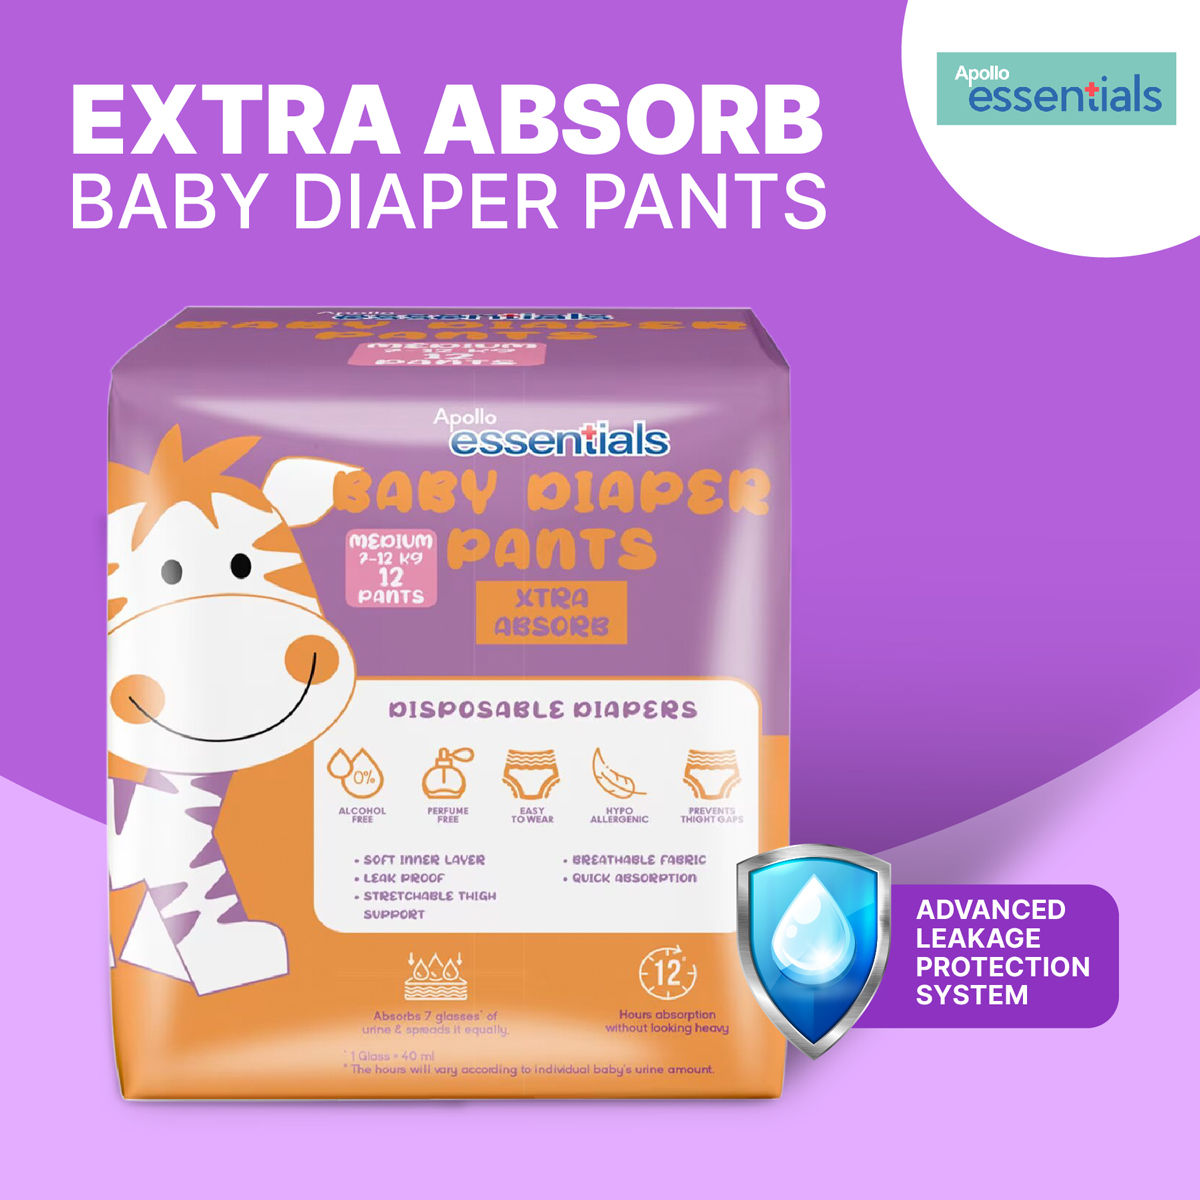 Apollo Essentials Extra Absorb Baby Diaper Pants Medium, 12 Count, Pack of 1 